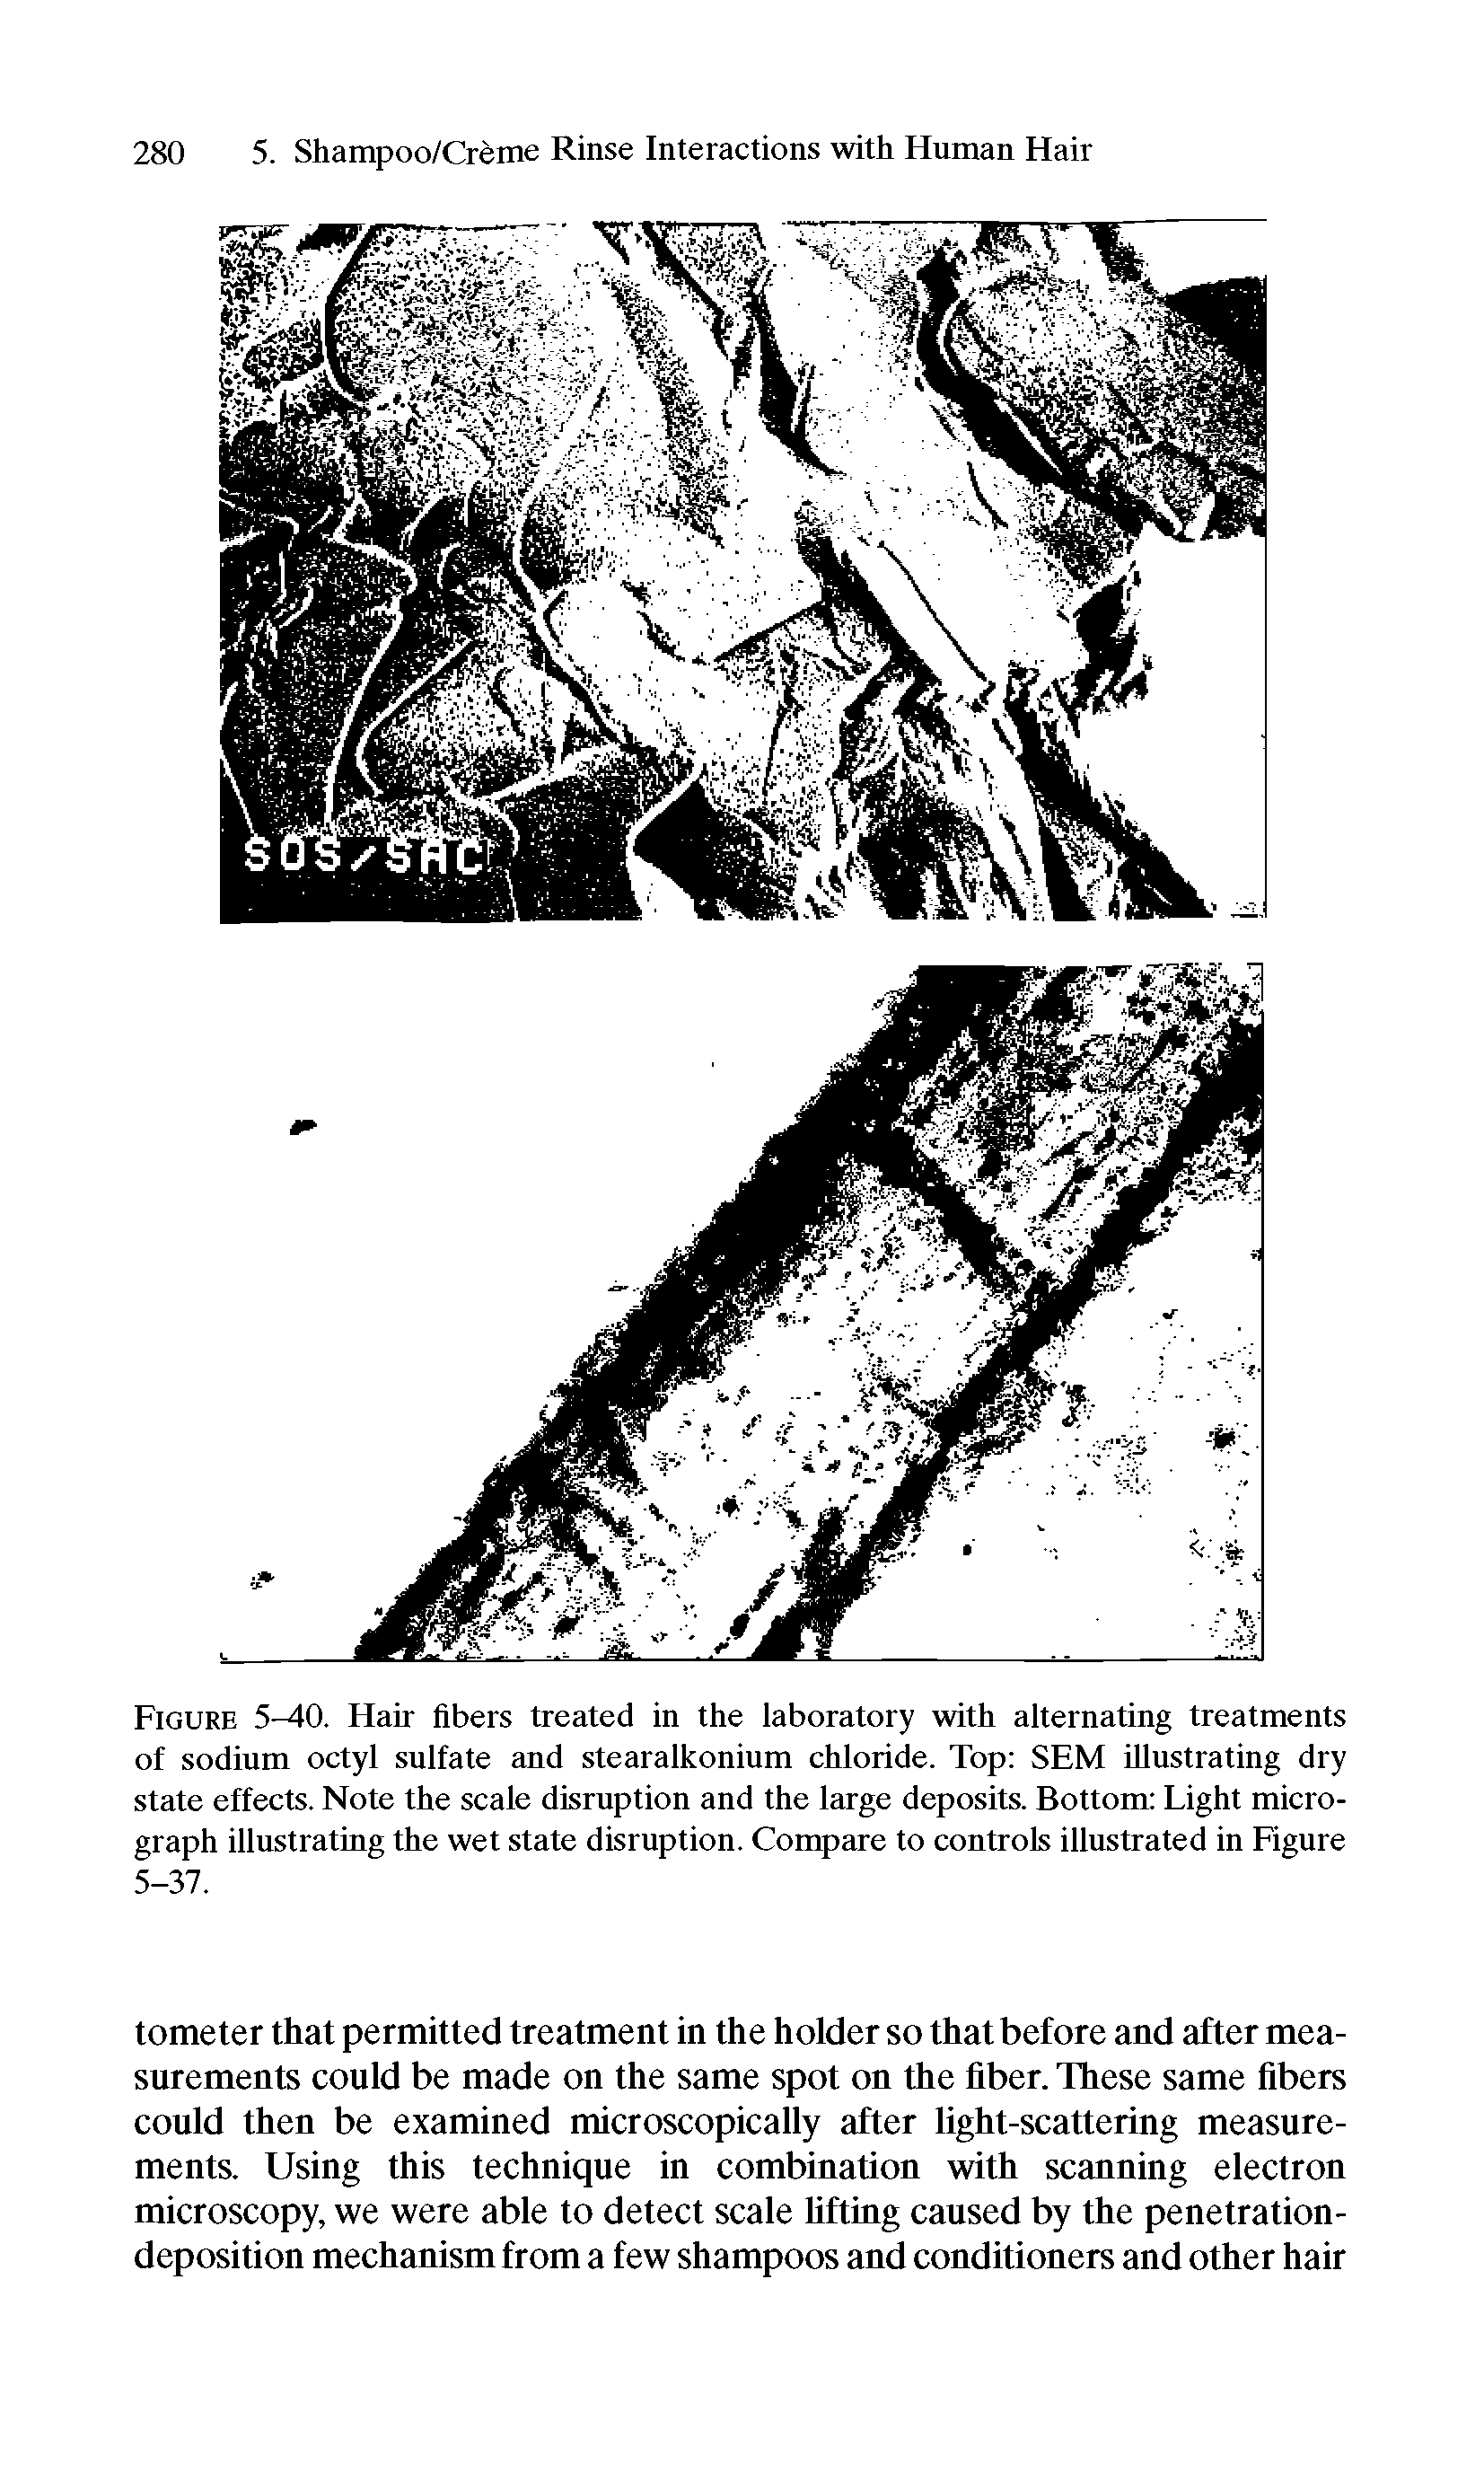 Figure 5-40. Hair fibers treated in the laboratory with alternating treatments of sodium octyl sulfate and stearalkonium chloride. Top SEM illustrating dry state effects. Note the scale disruption and the large deposits. Bottom Light micrograph illustrating the wet state disruption. Compare to controls illustrated in Figure 5-37.